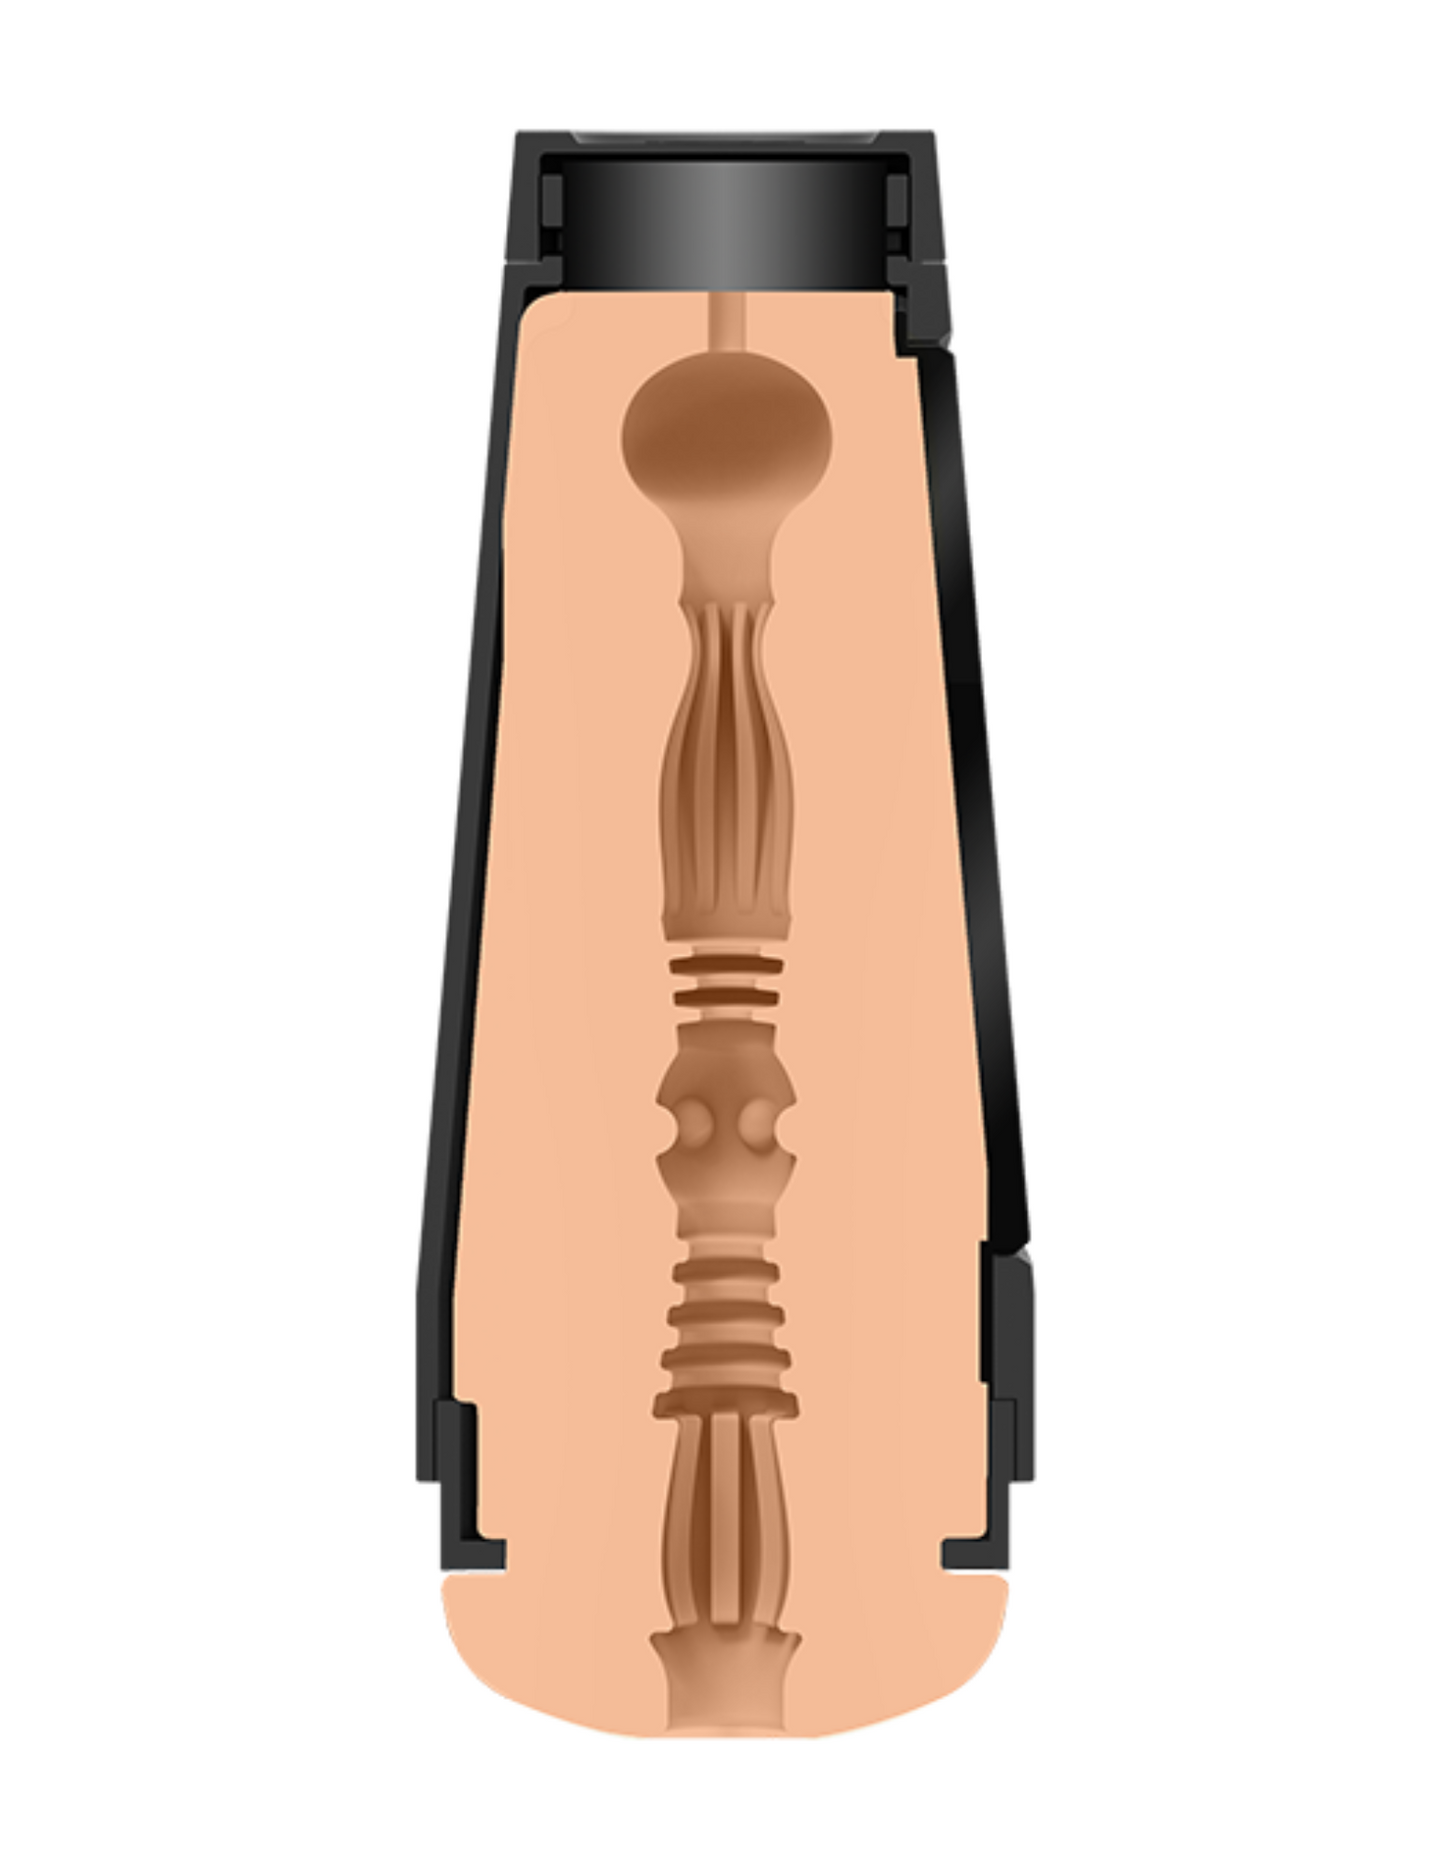 Image shows the inside texture of the Adira Allure Main Squeeze Ultraskyn Masturbator from Doc Johnson.